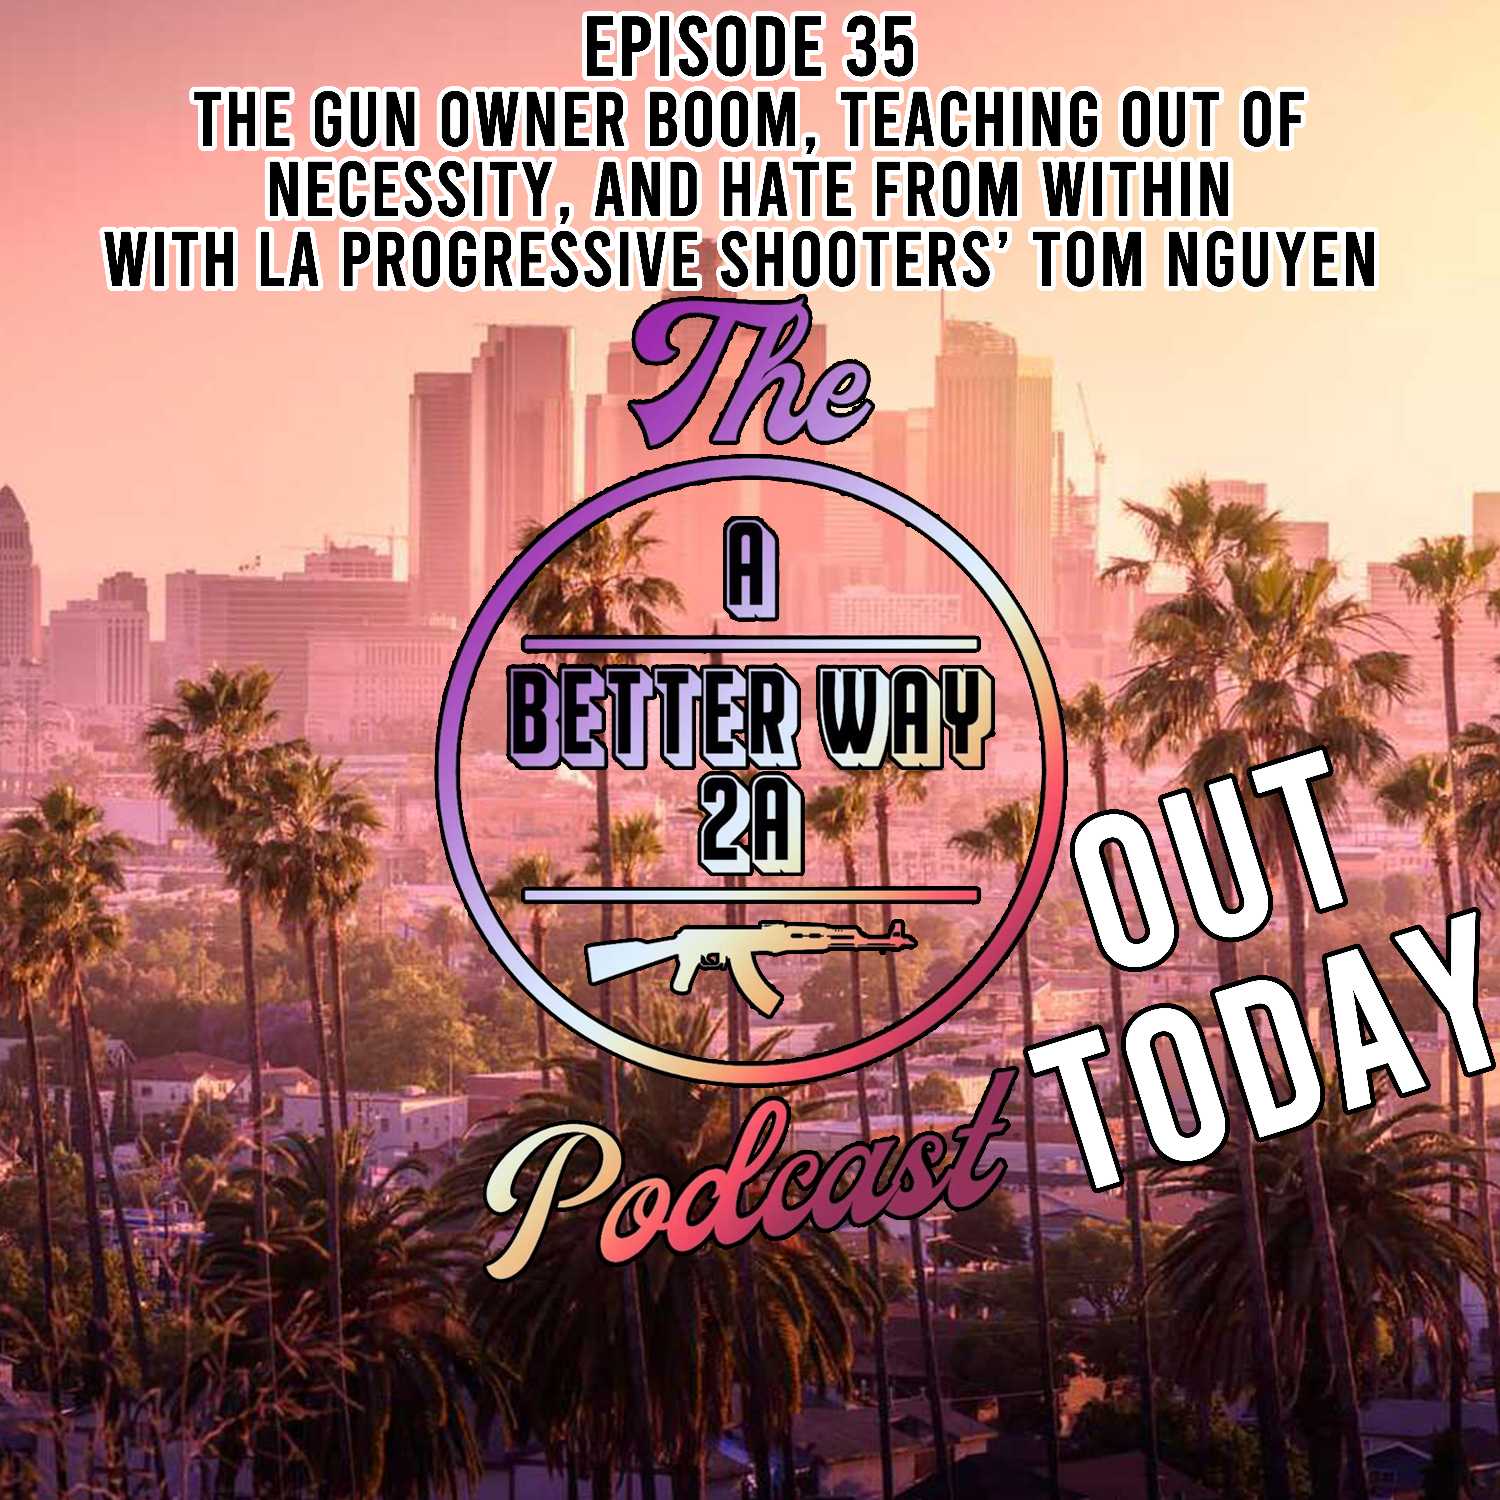 Episode 35 - The Gun Owner Boom, Teaching Out Of Necessity, And Hate From Within with LA Progressive Shooters' Tom Nguyen